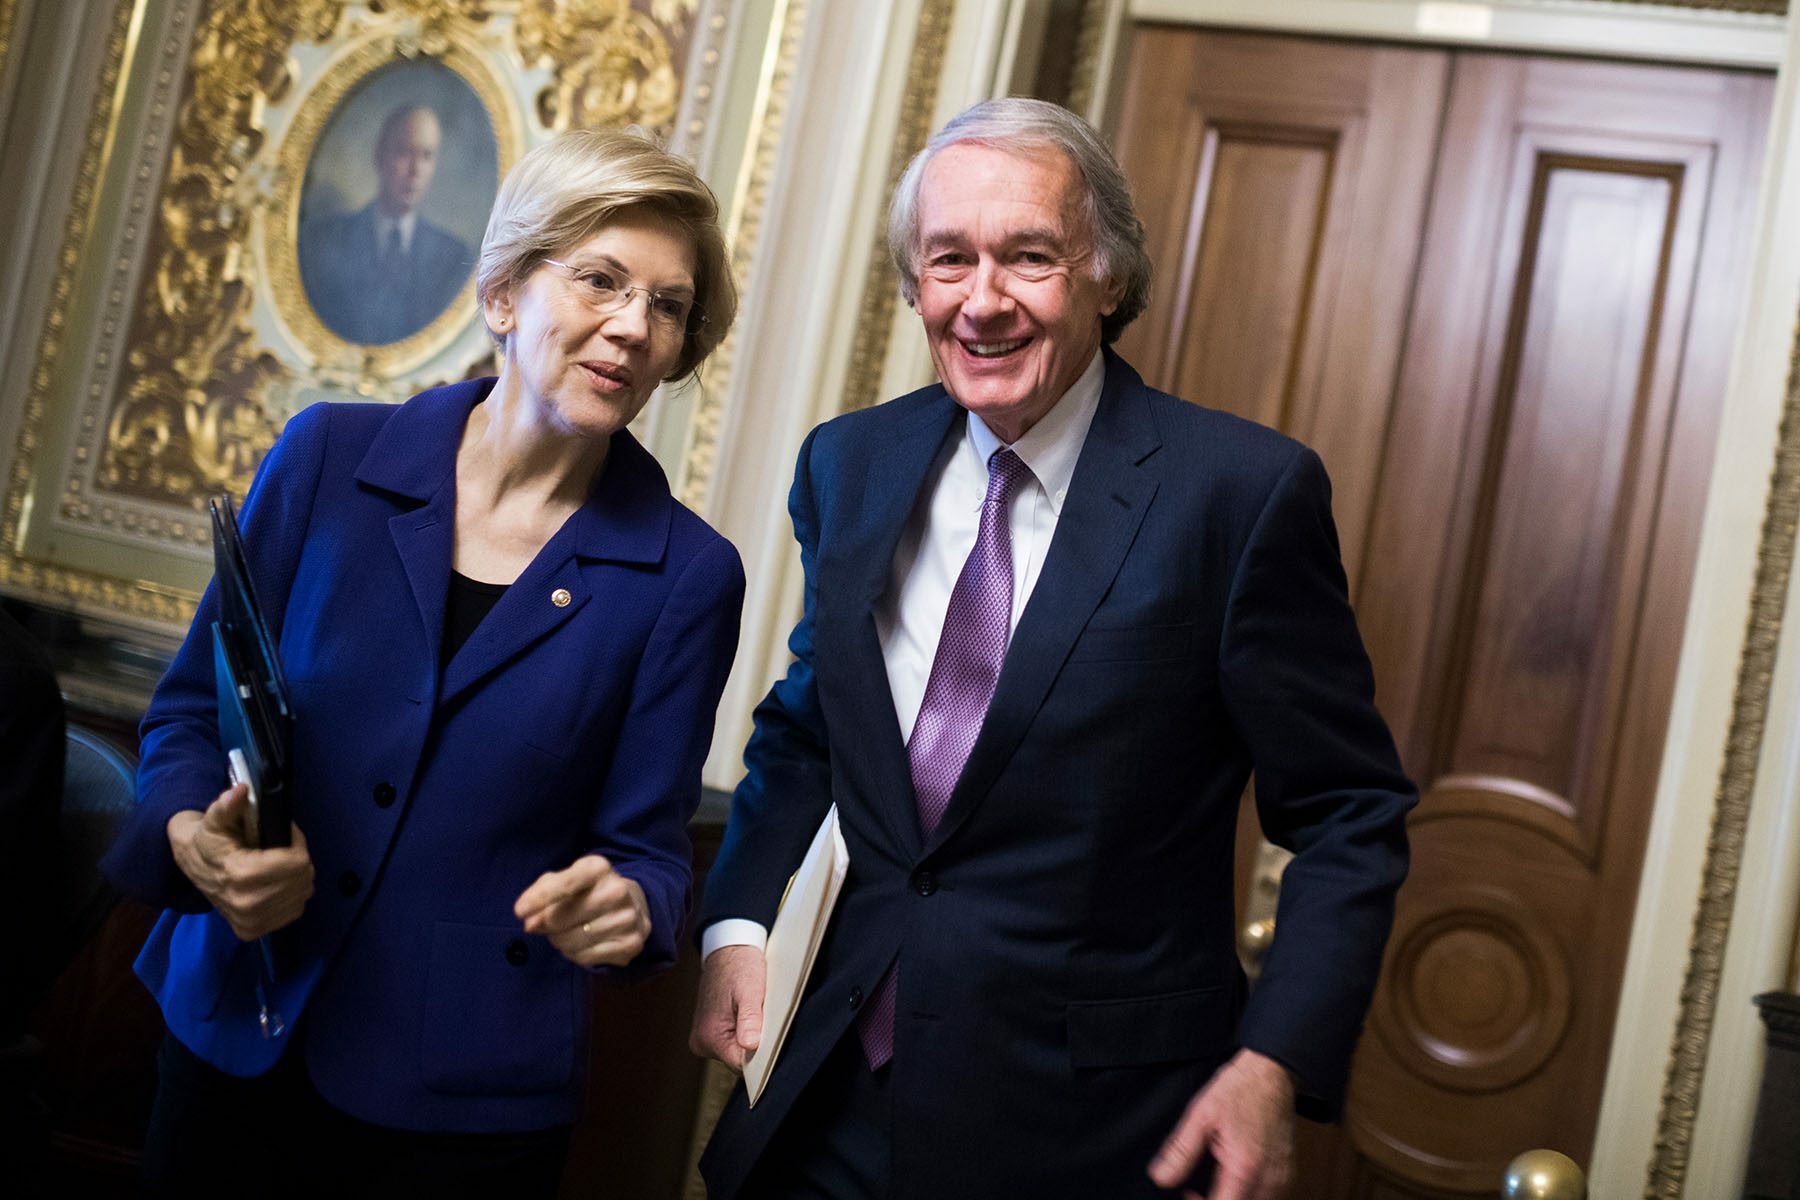 Sens. Ed Markey and Elizabeth Warren smile while speaking to each other on Capitol Hill.